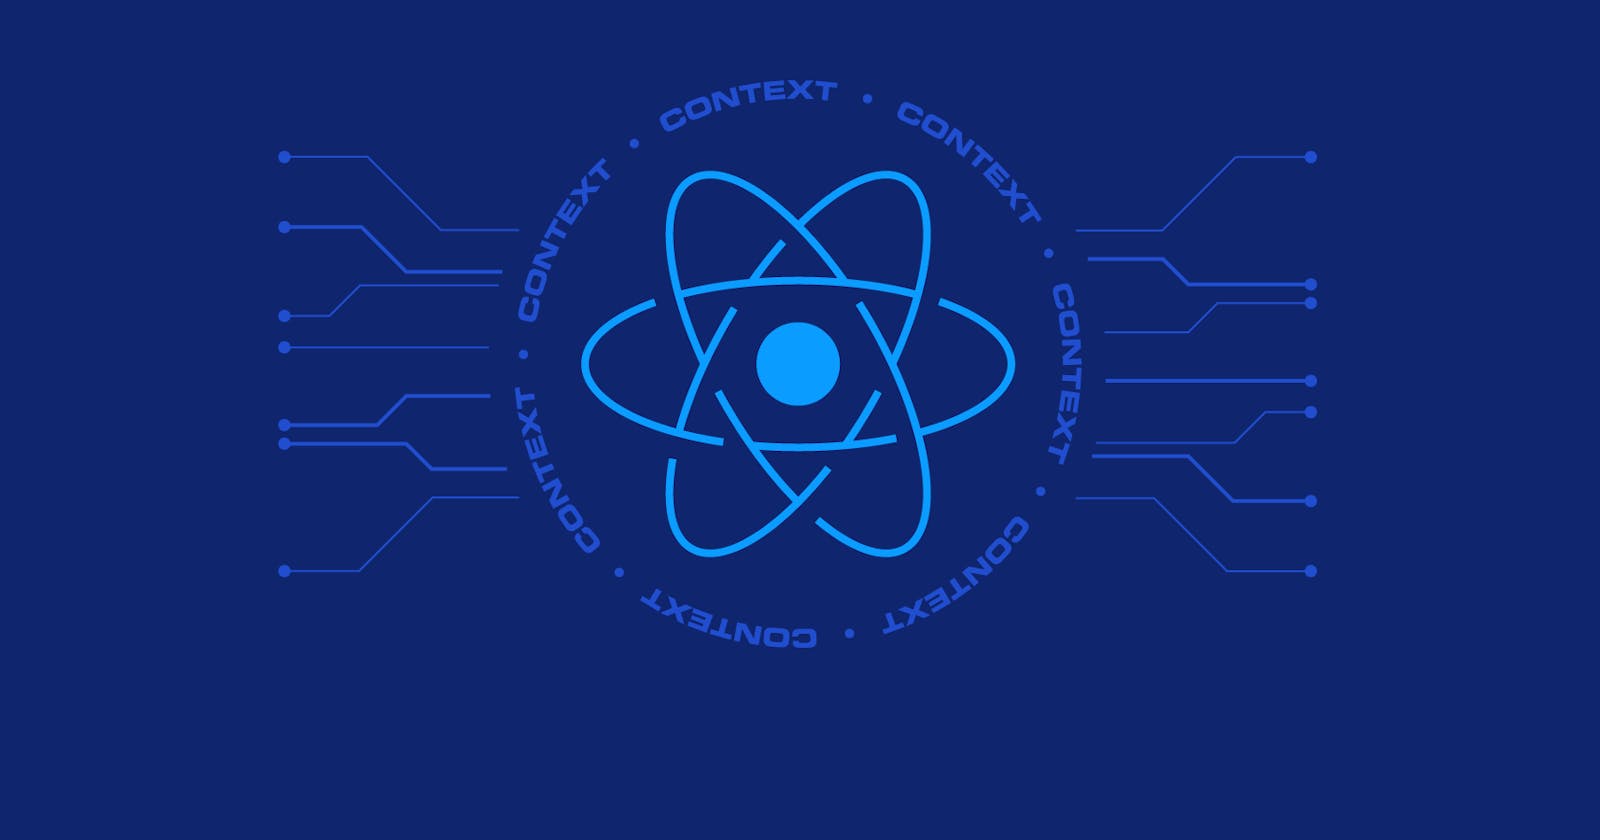 Getting Started with React Context API